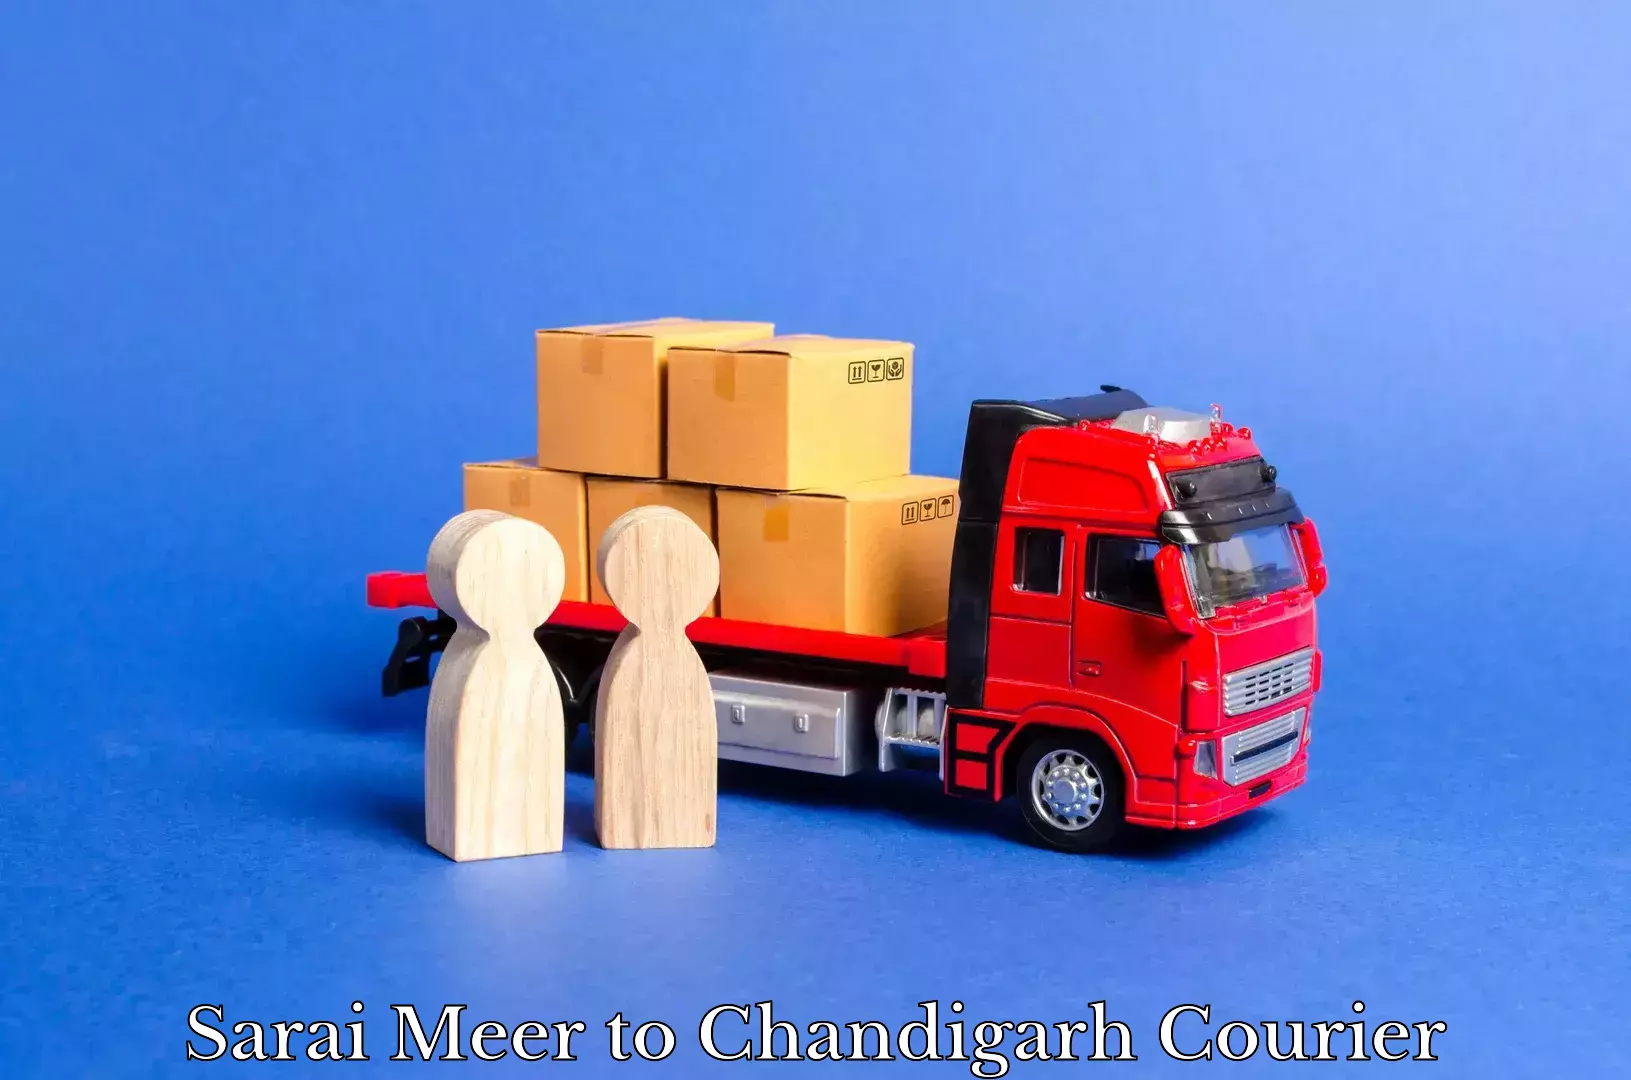 Courier service booking Sarai Meer to Chandigarh